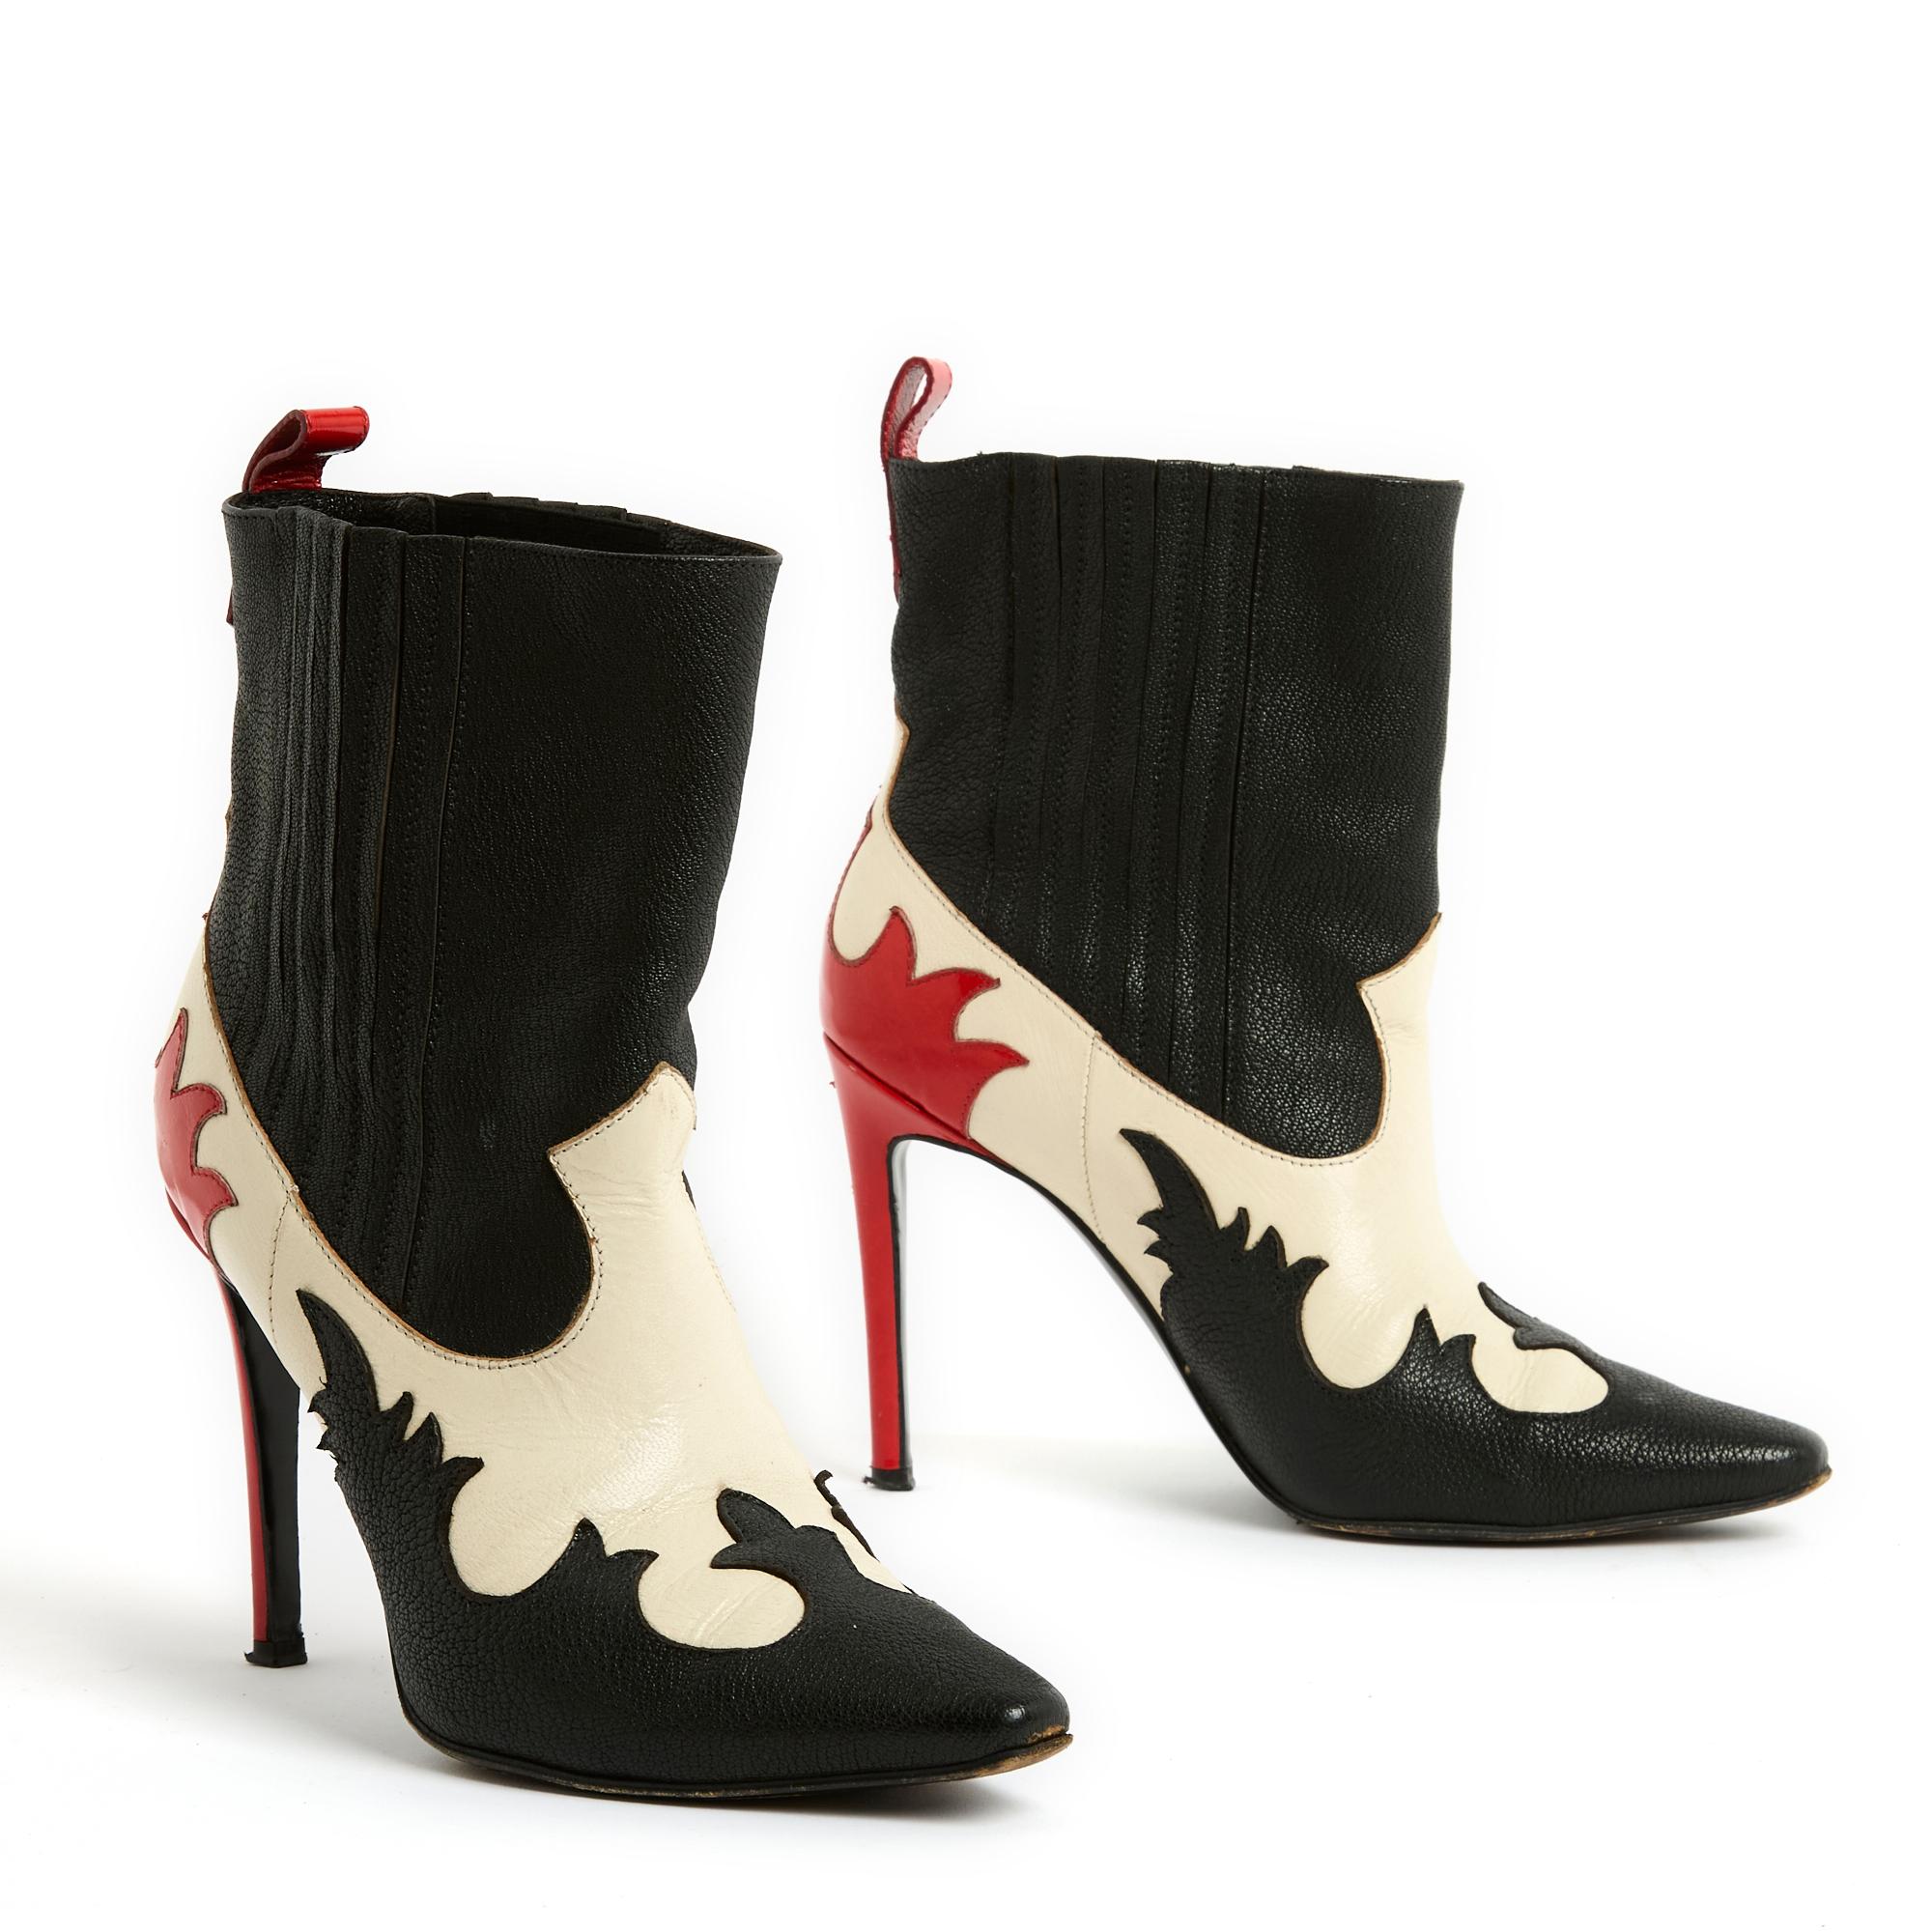 Michel Perry boots, stiletto heel, red, white and black tricolor western pattern in leather inserts, comfort elastic on each side but the boots slip on easily, heel covered in red patent leather. Size 40EU, insole 25.7 cm (excluding toe), heel 11 cm